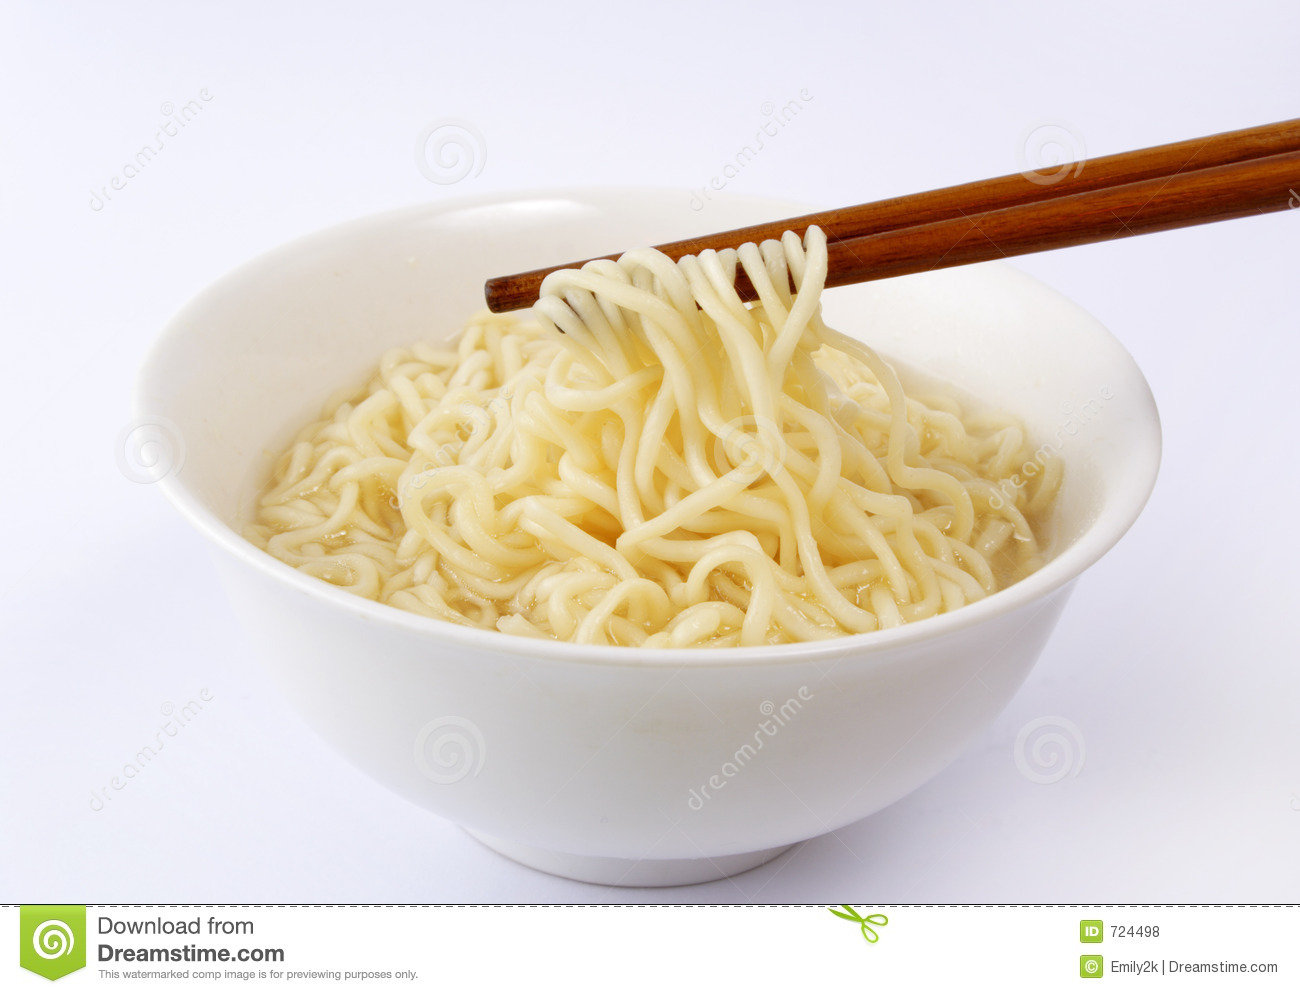 Instant Noodle Royalty Free Stock Photos   Image  724498